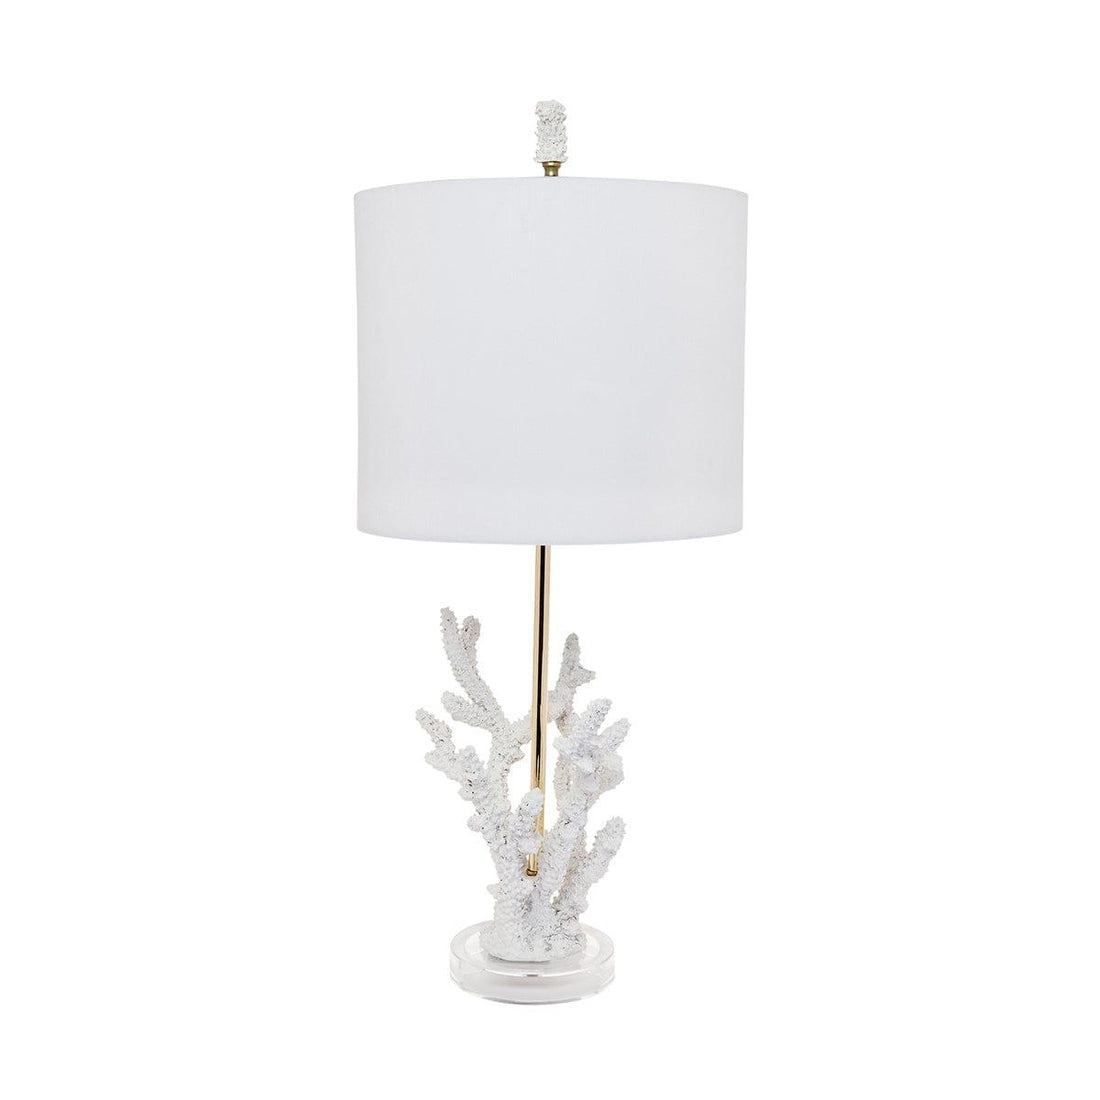 House Journey Table Lamp Daphne Table Lamp